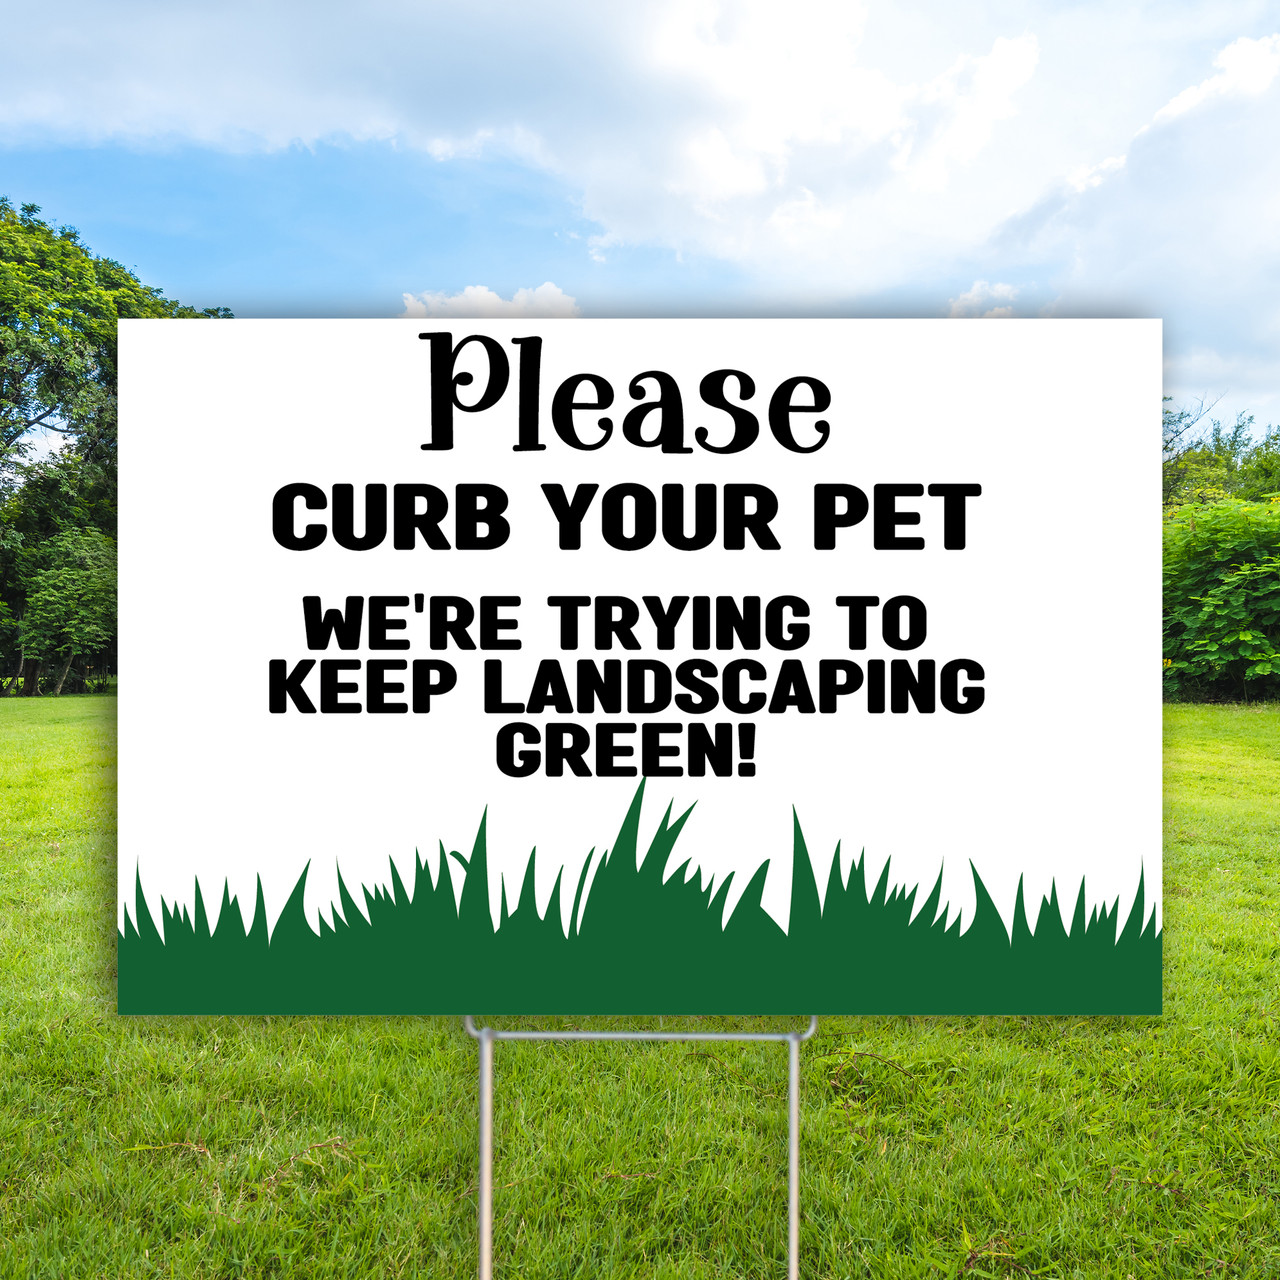 Curb Pet Landscaping: 12"x18" Lawn Sign